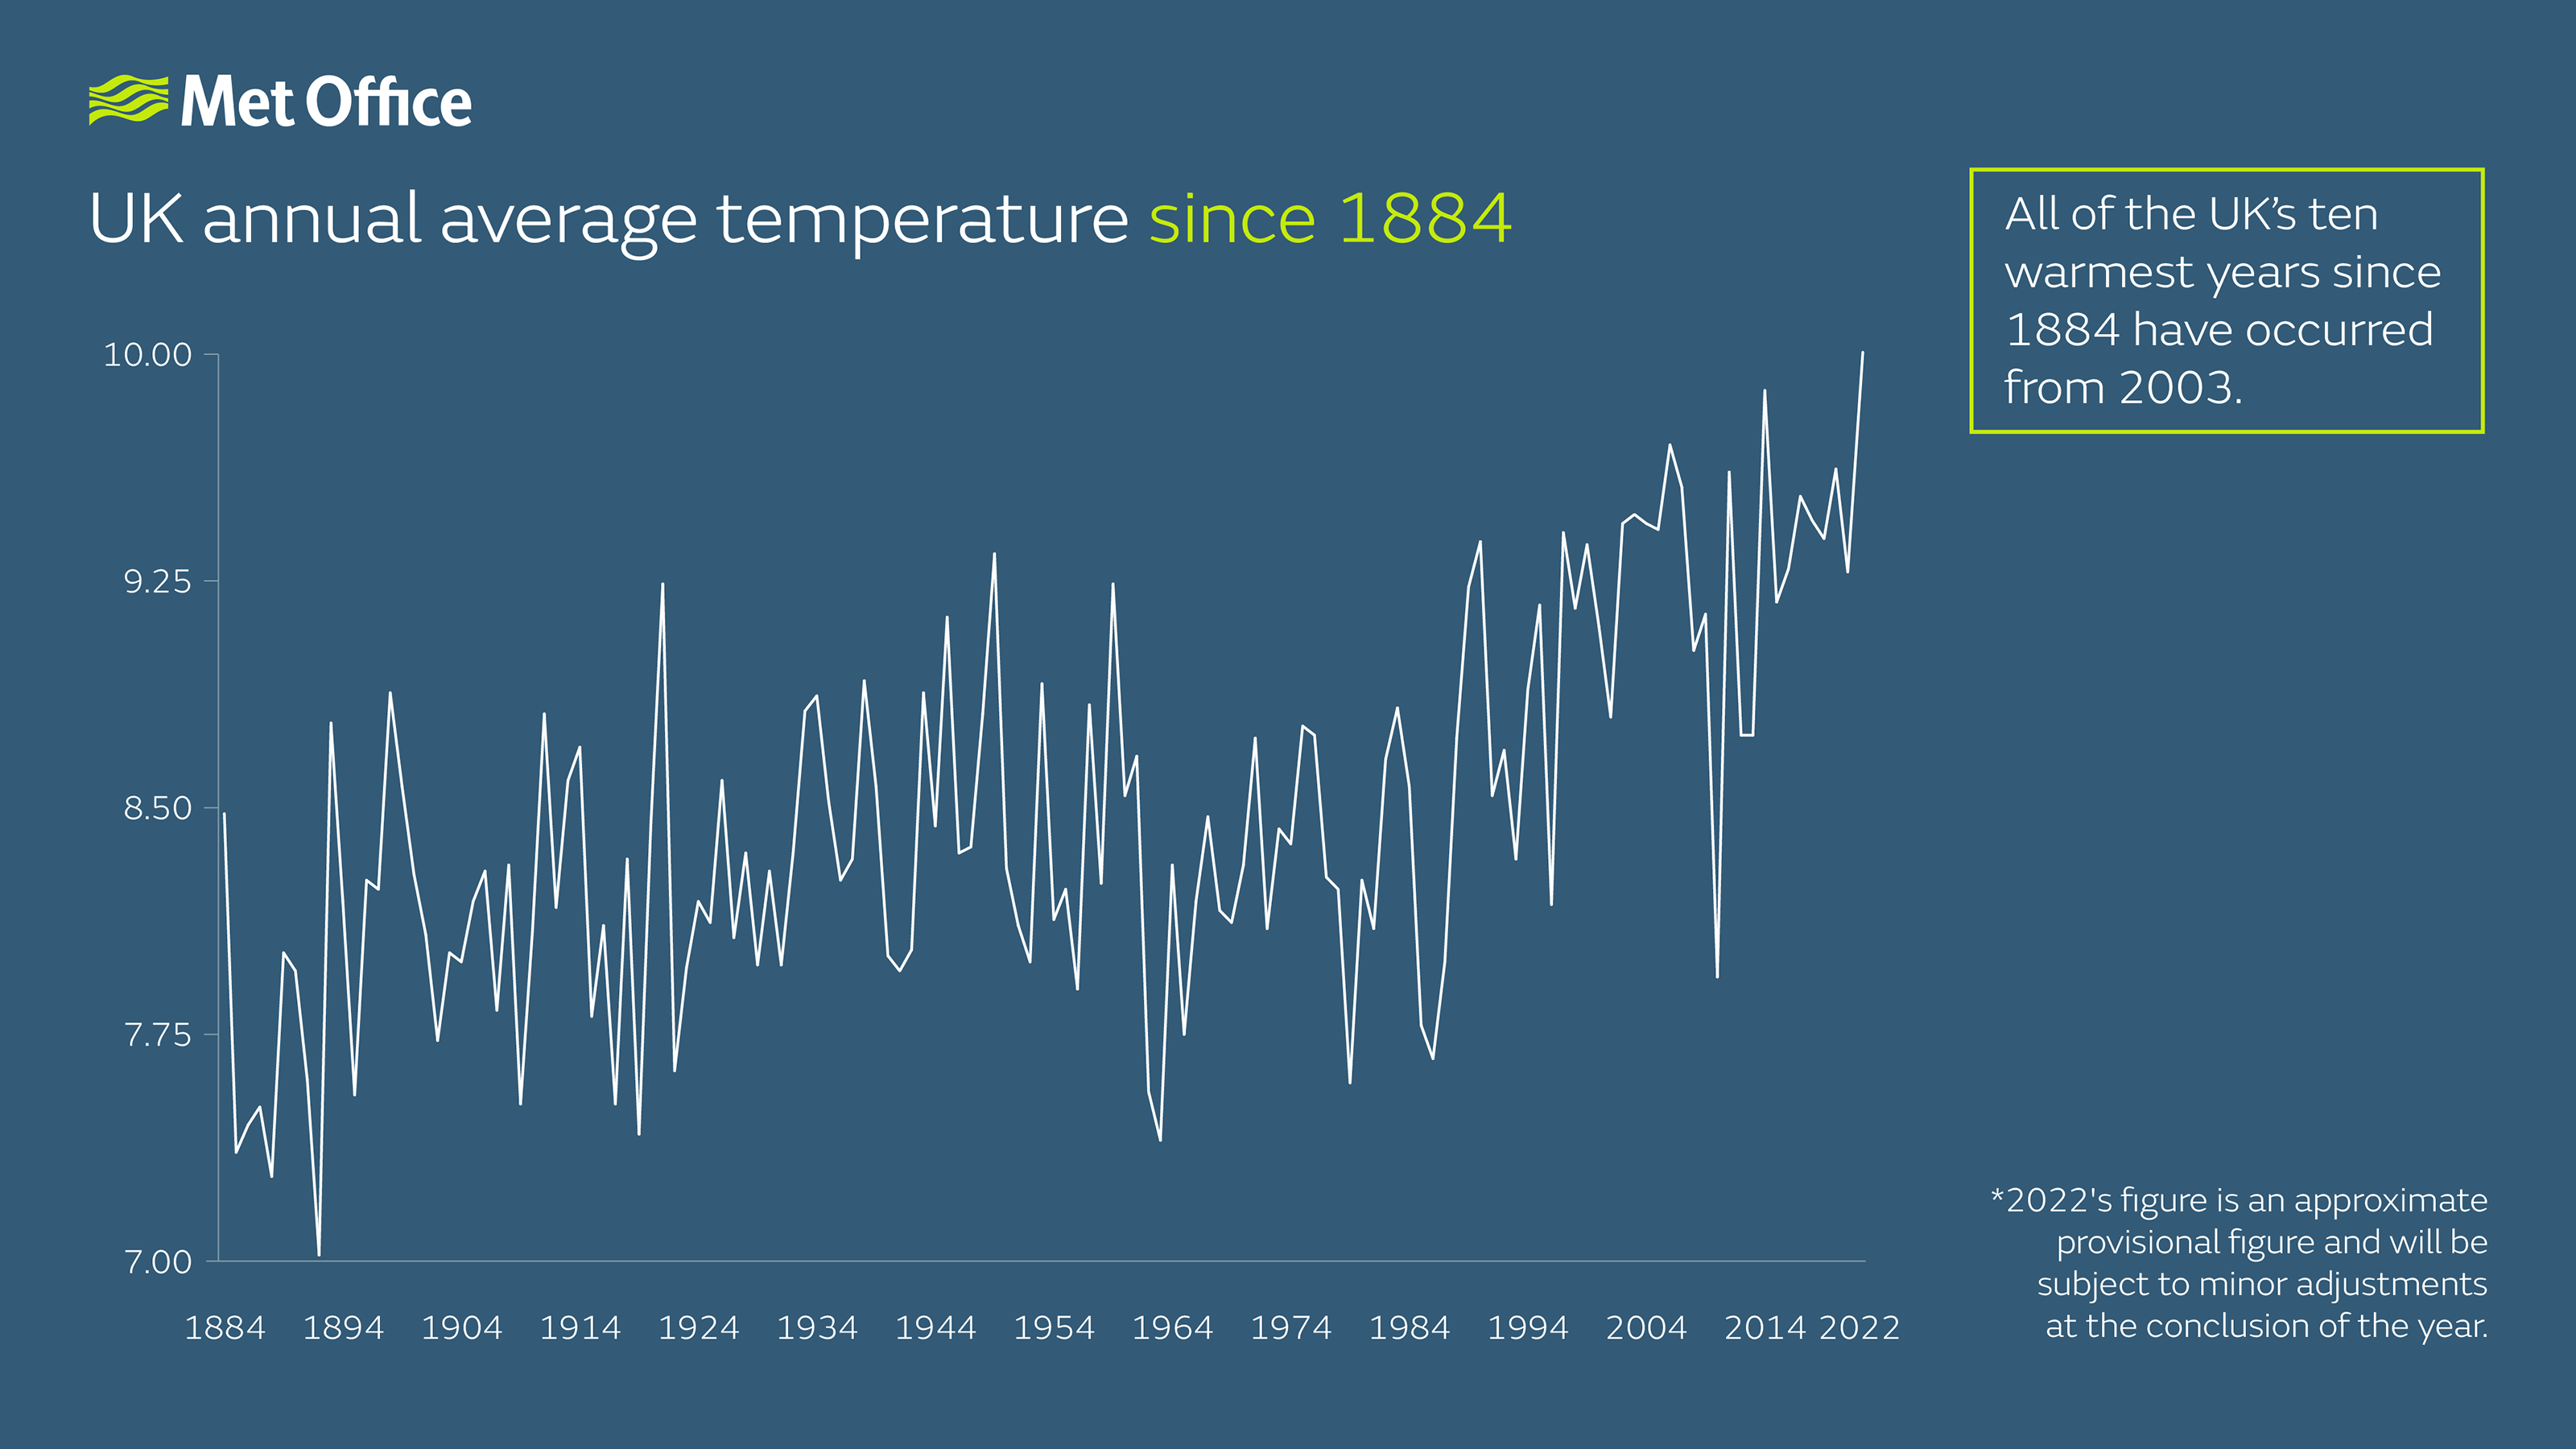 A graph showing average annual mean temperature for the UK since 1884. The graph shows variation of temperatures year-by-year but a general trend upwards through the period. It shows 2022 as the highest figure so far, according to provisional figures.